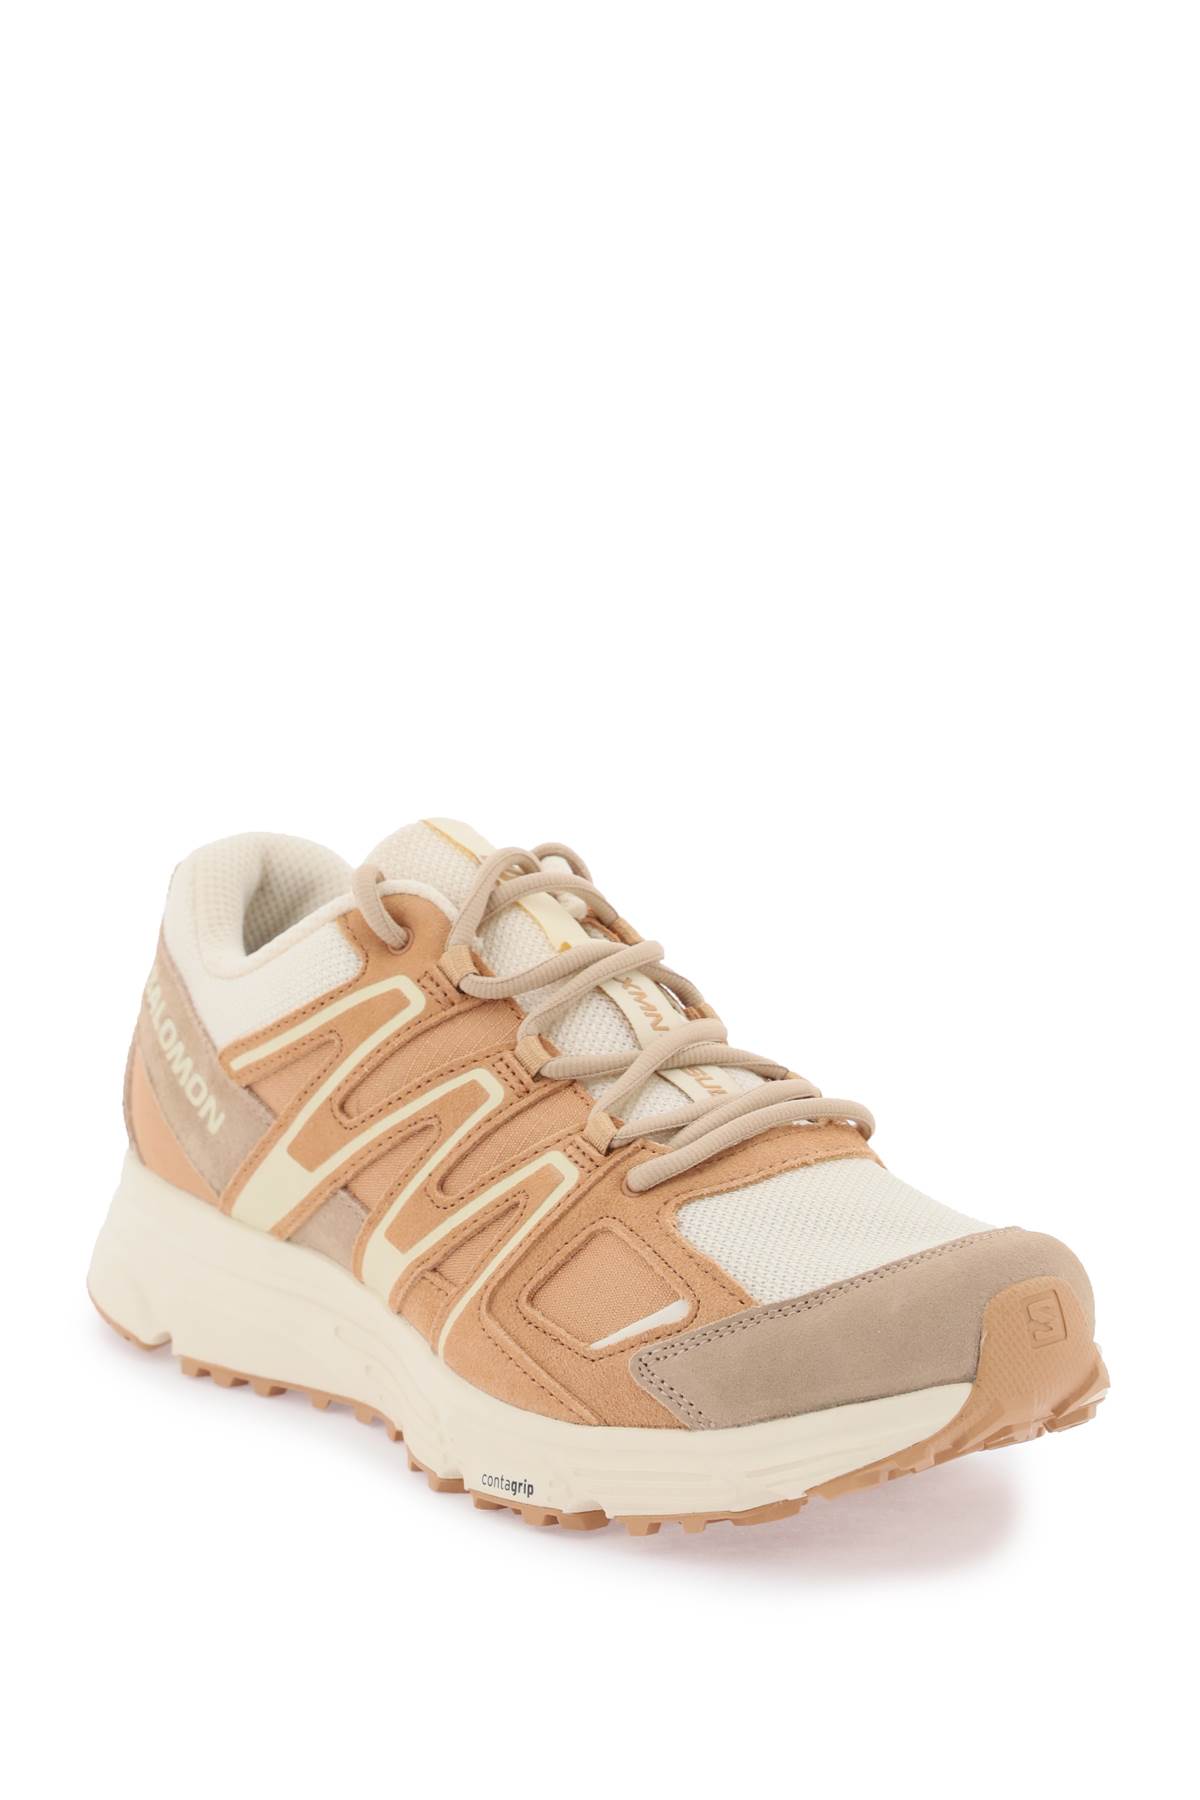 Shop Salomon X-mission 4 Suede Sneakers In Natural Sandstorm Bleached Sand (white)